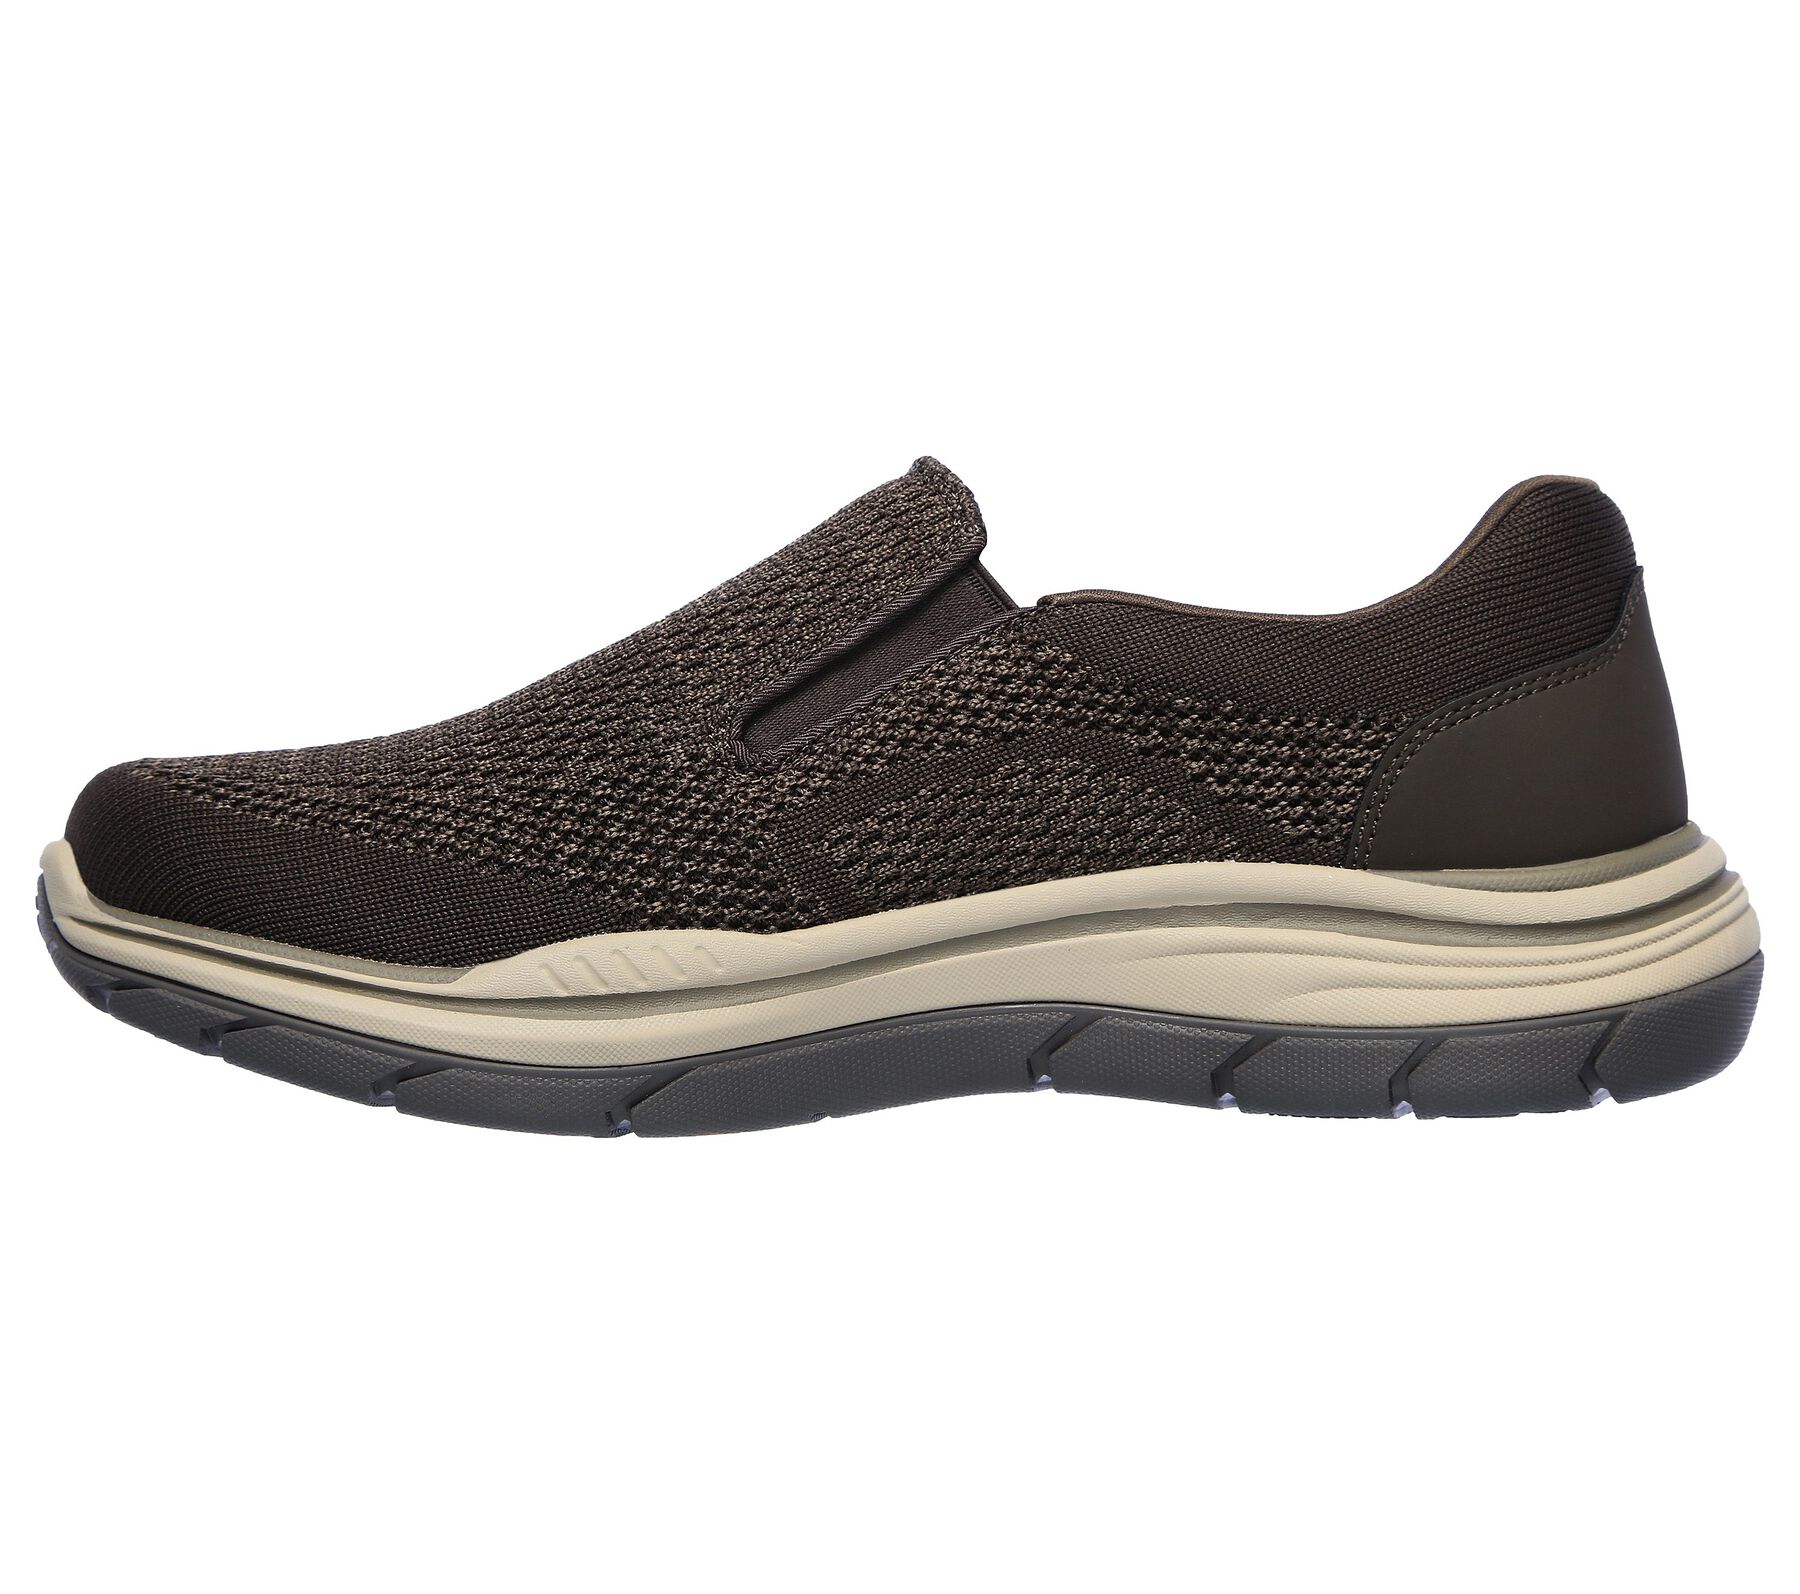 Shop the Relaxed Fit: Expected 2.0 - Arago | SKECHERS